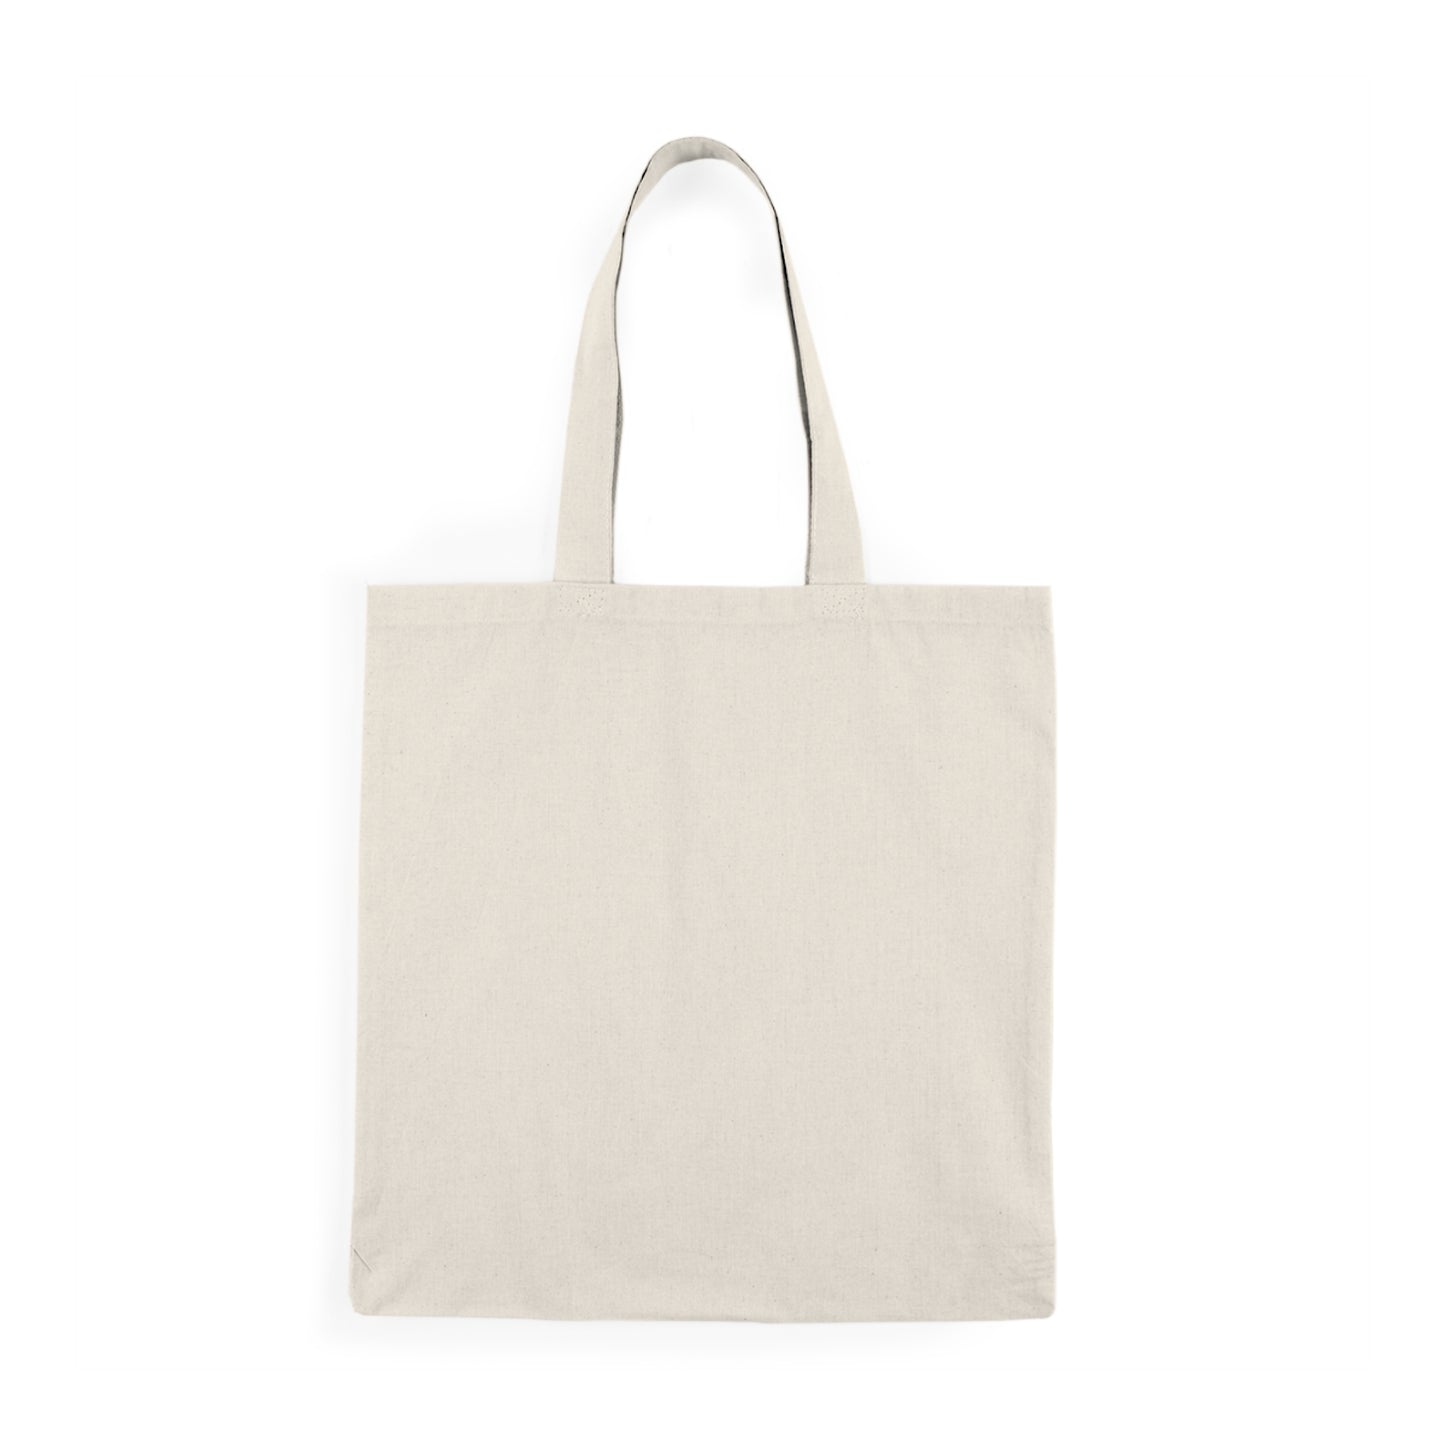 The Hurricane Caged Inside of Her - Natural Tote Bag